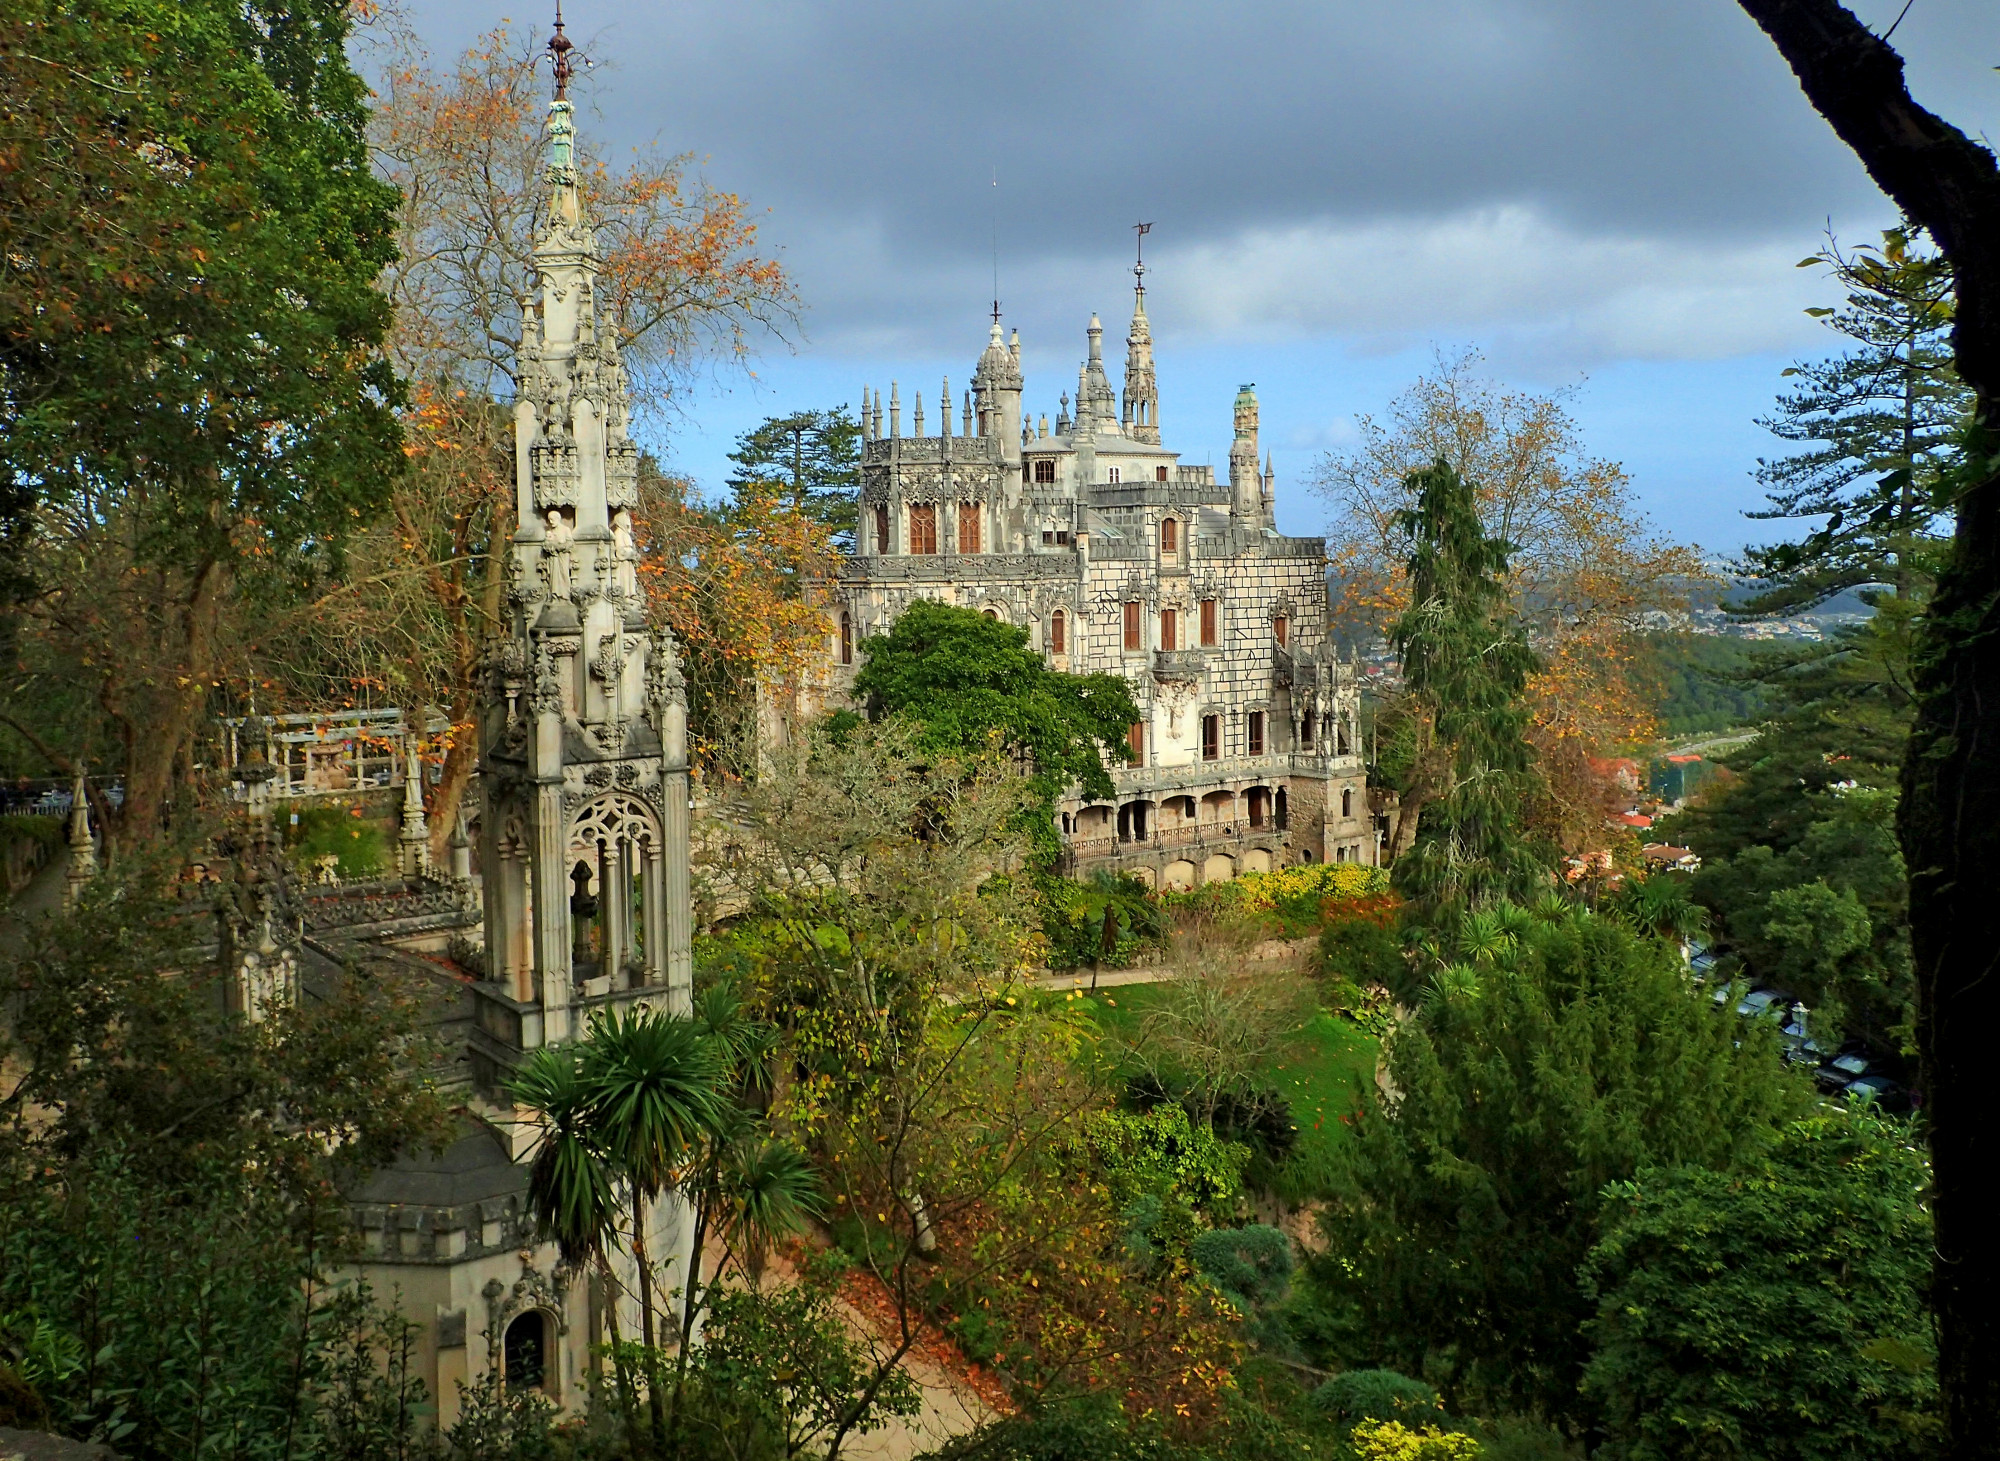 18th Century Rigaleira Palace built in the Romantic Style in Sintra, Portugal